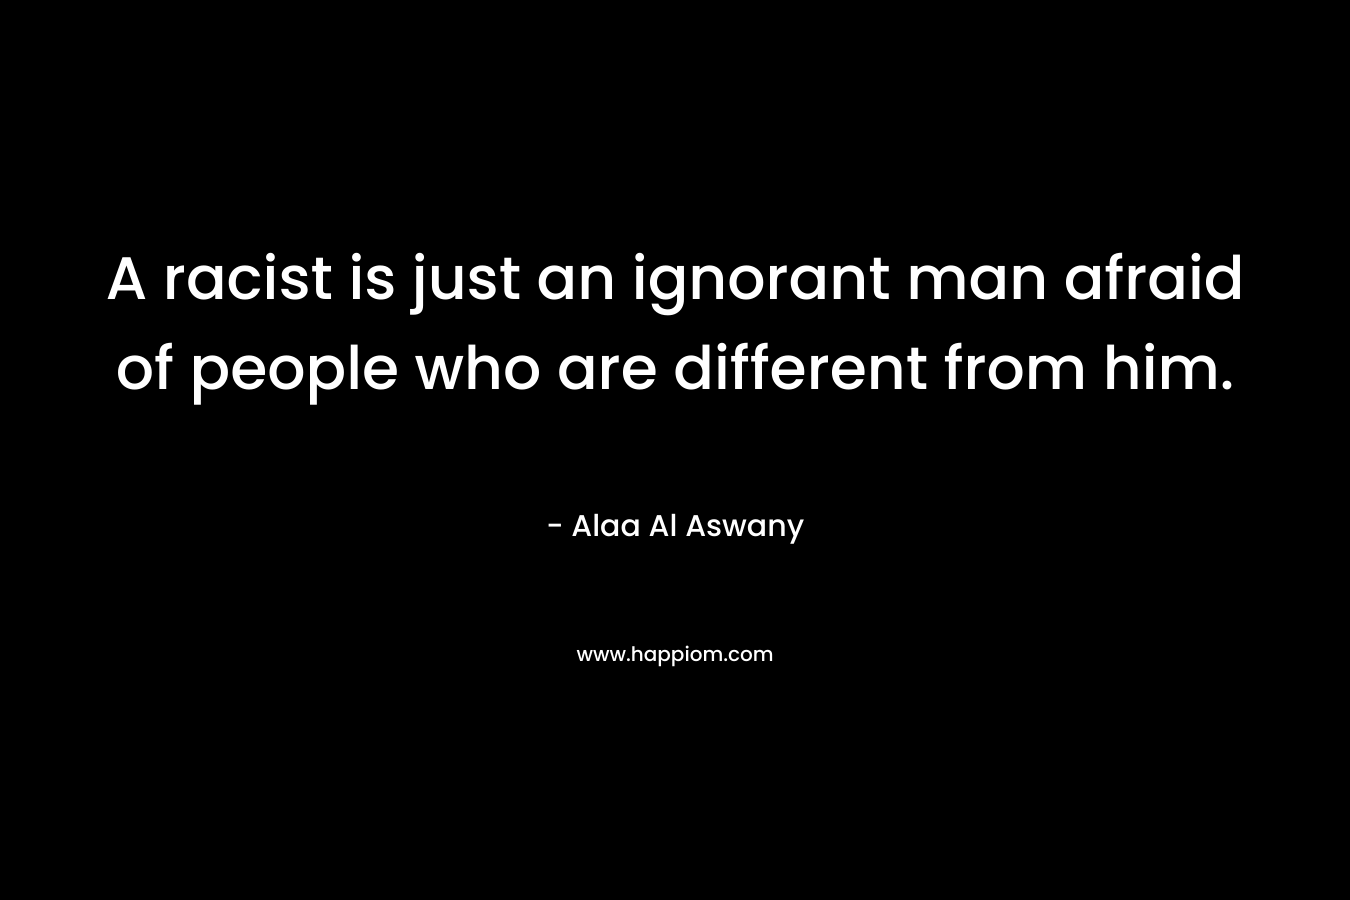 A racist is just an ignorant man afraid of people who are different from him. – Alaa Al Aswany